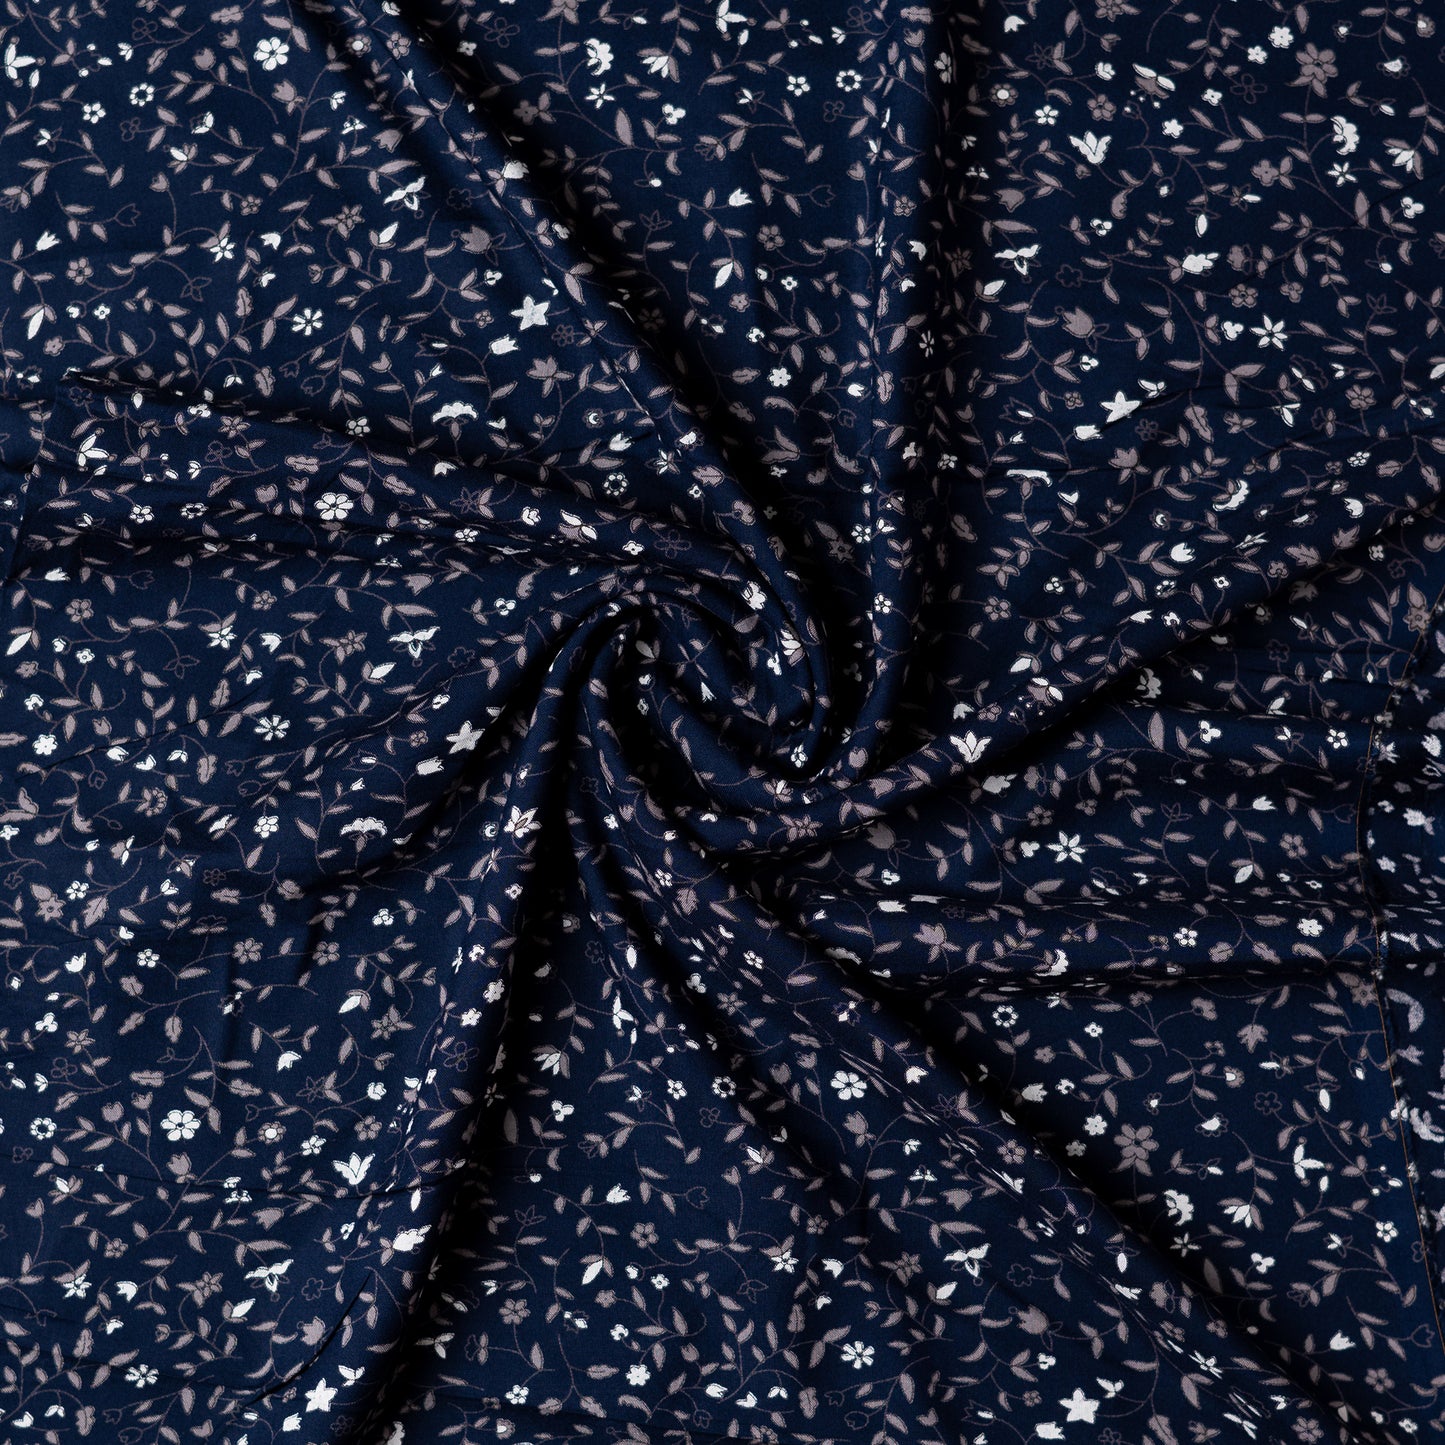 Navy blue color rayon fabric with white and grey color floral prints, this is a small print design elegant fabric